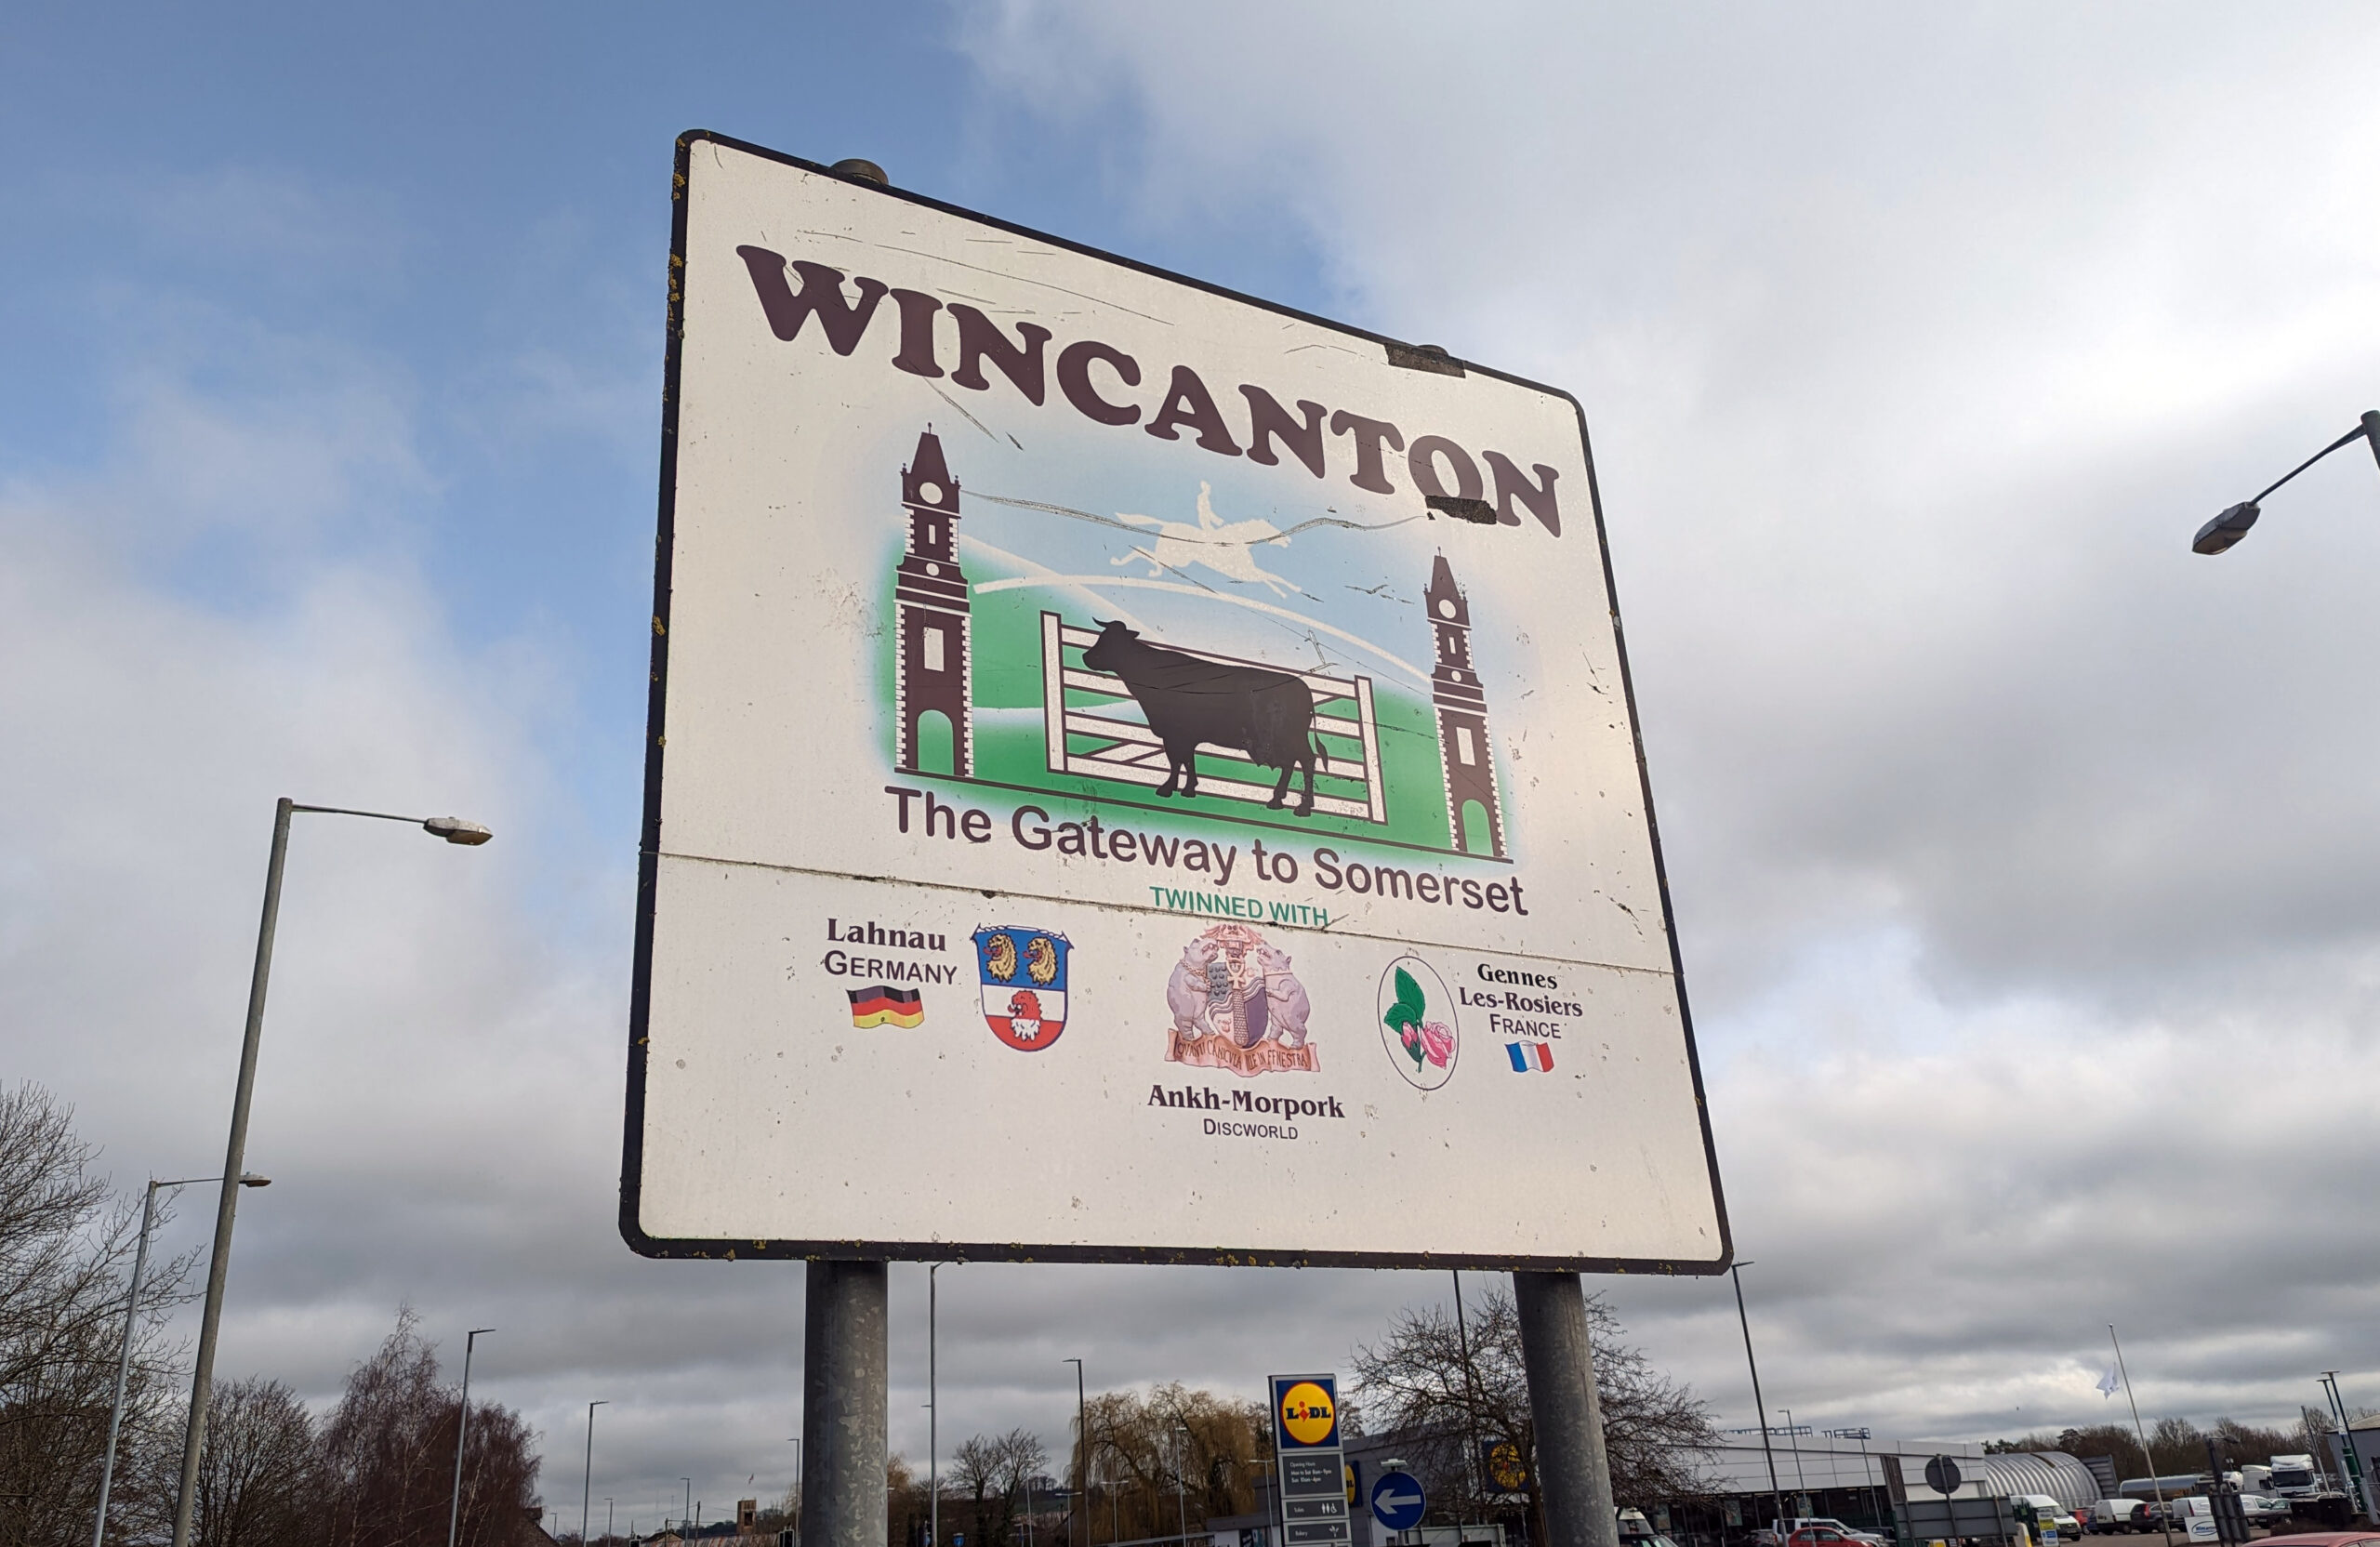 The sign showing Wincanton is twinned with Ankh Morpork, Discworld